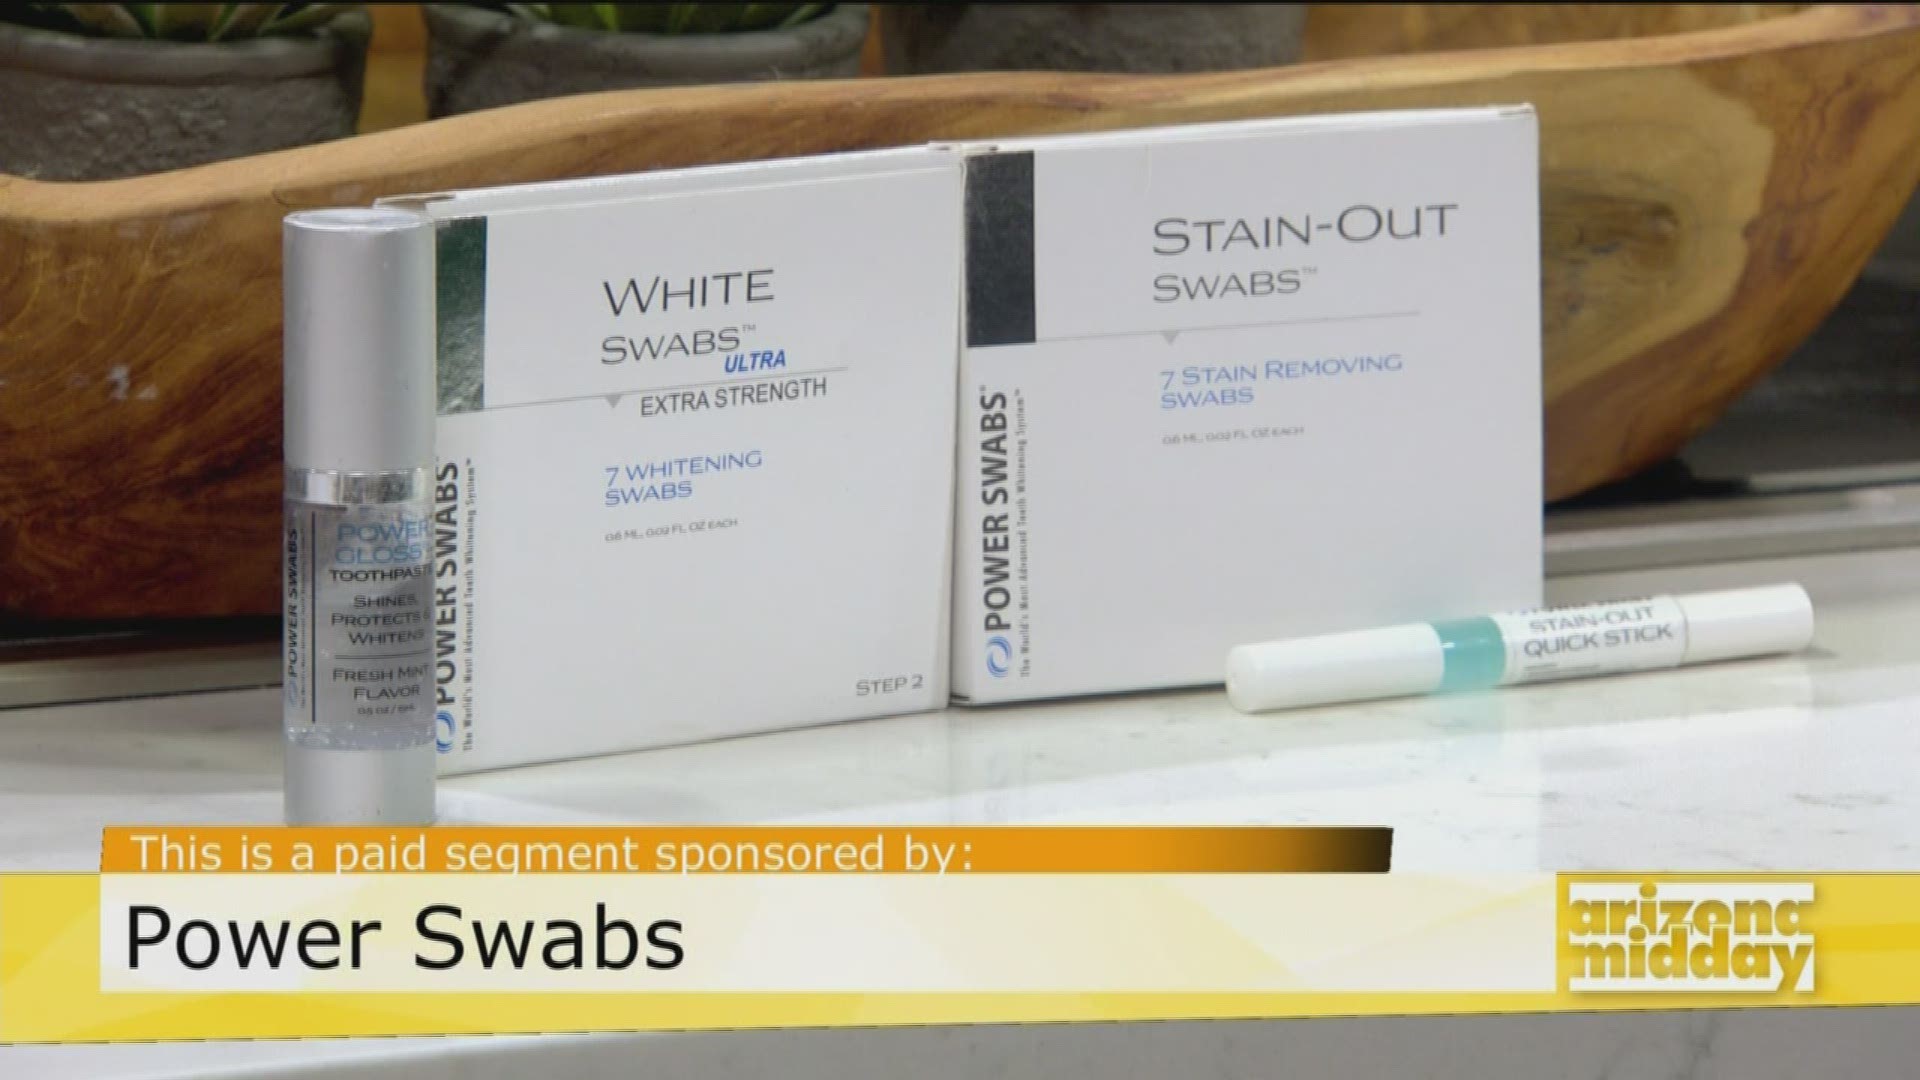 Lifestyle expert, Scott Defalco, gives us the details on how you can whiten your teeth with Power Swabs and see results in less than 5 minutes!